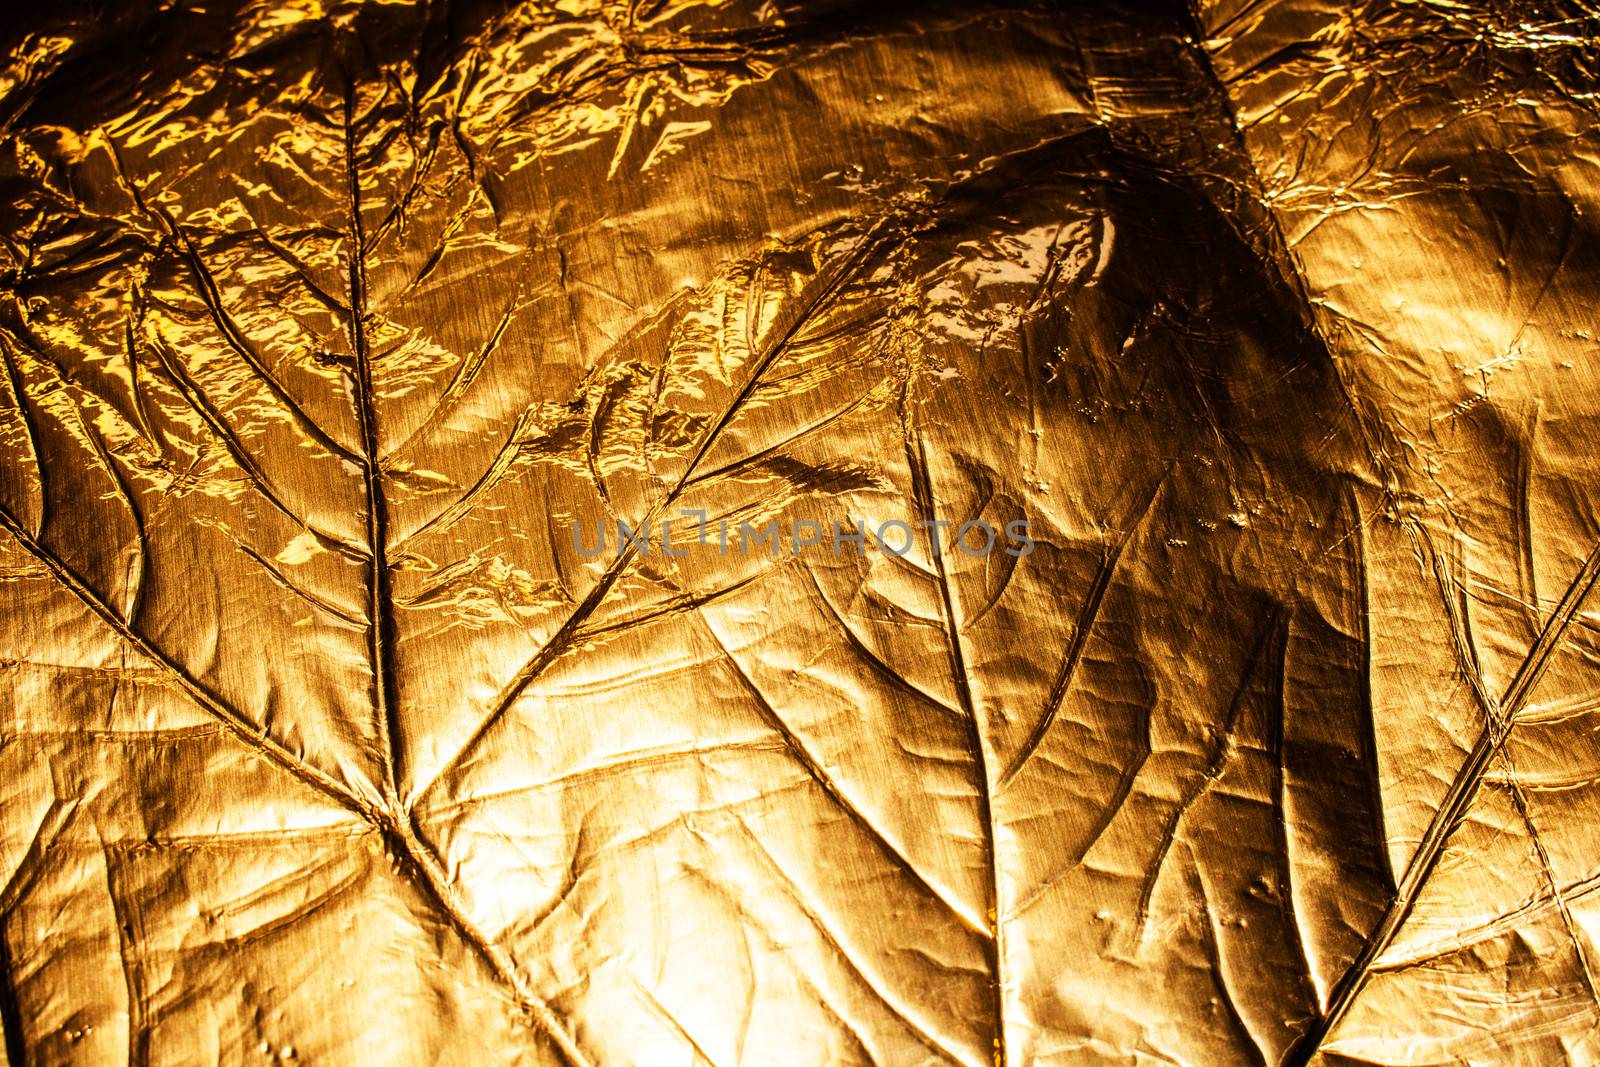 A gold Holographic Foil Leaf and Leaves with Veins Texture Shiny Pattern